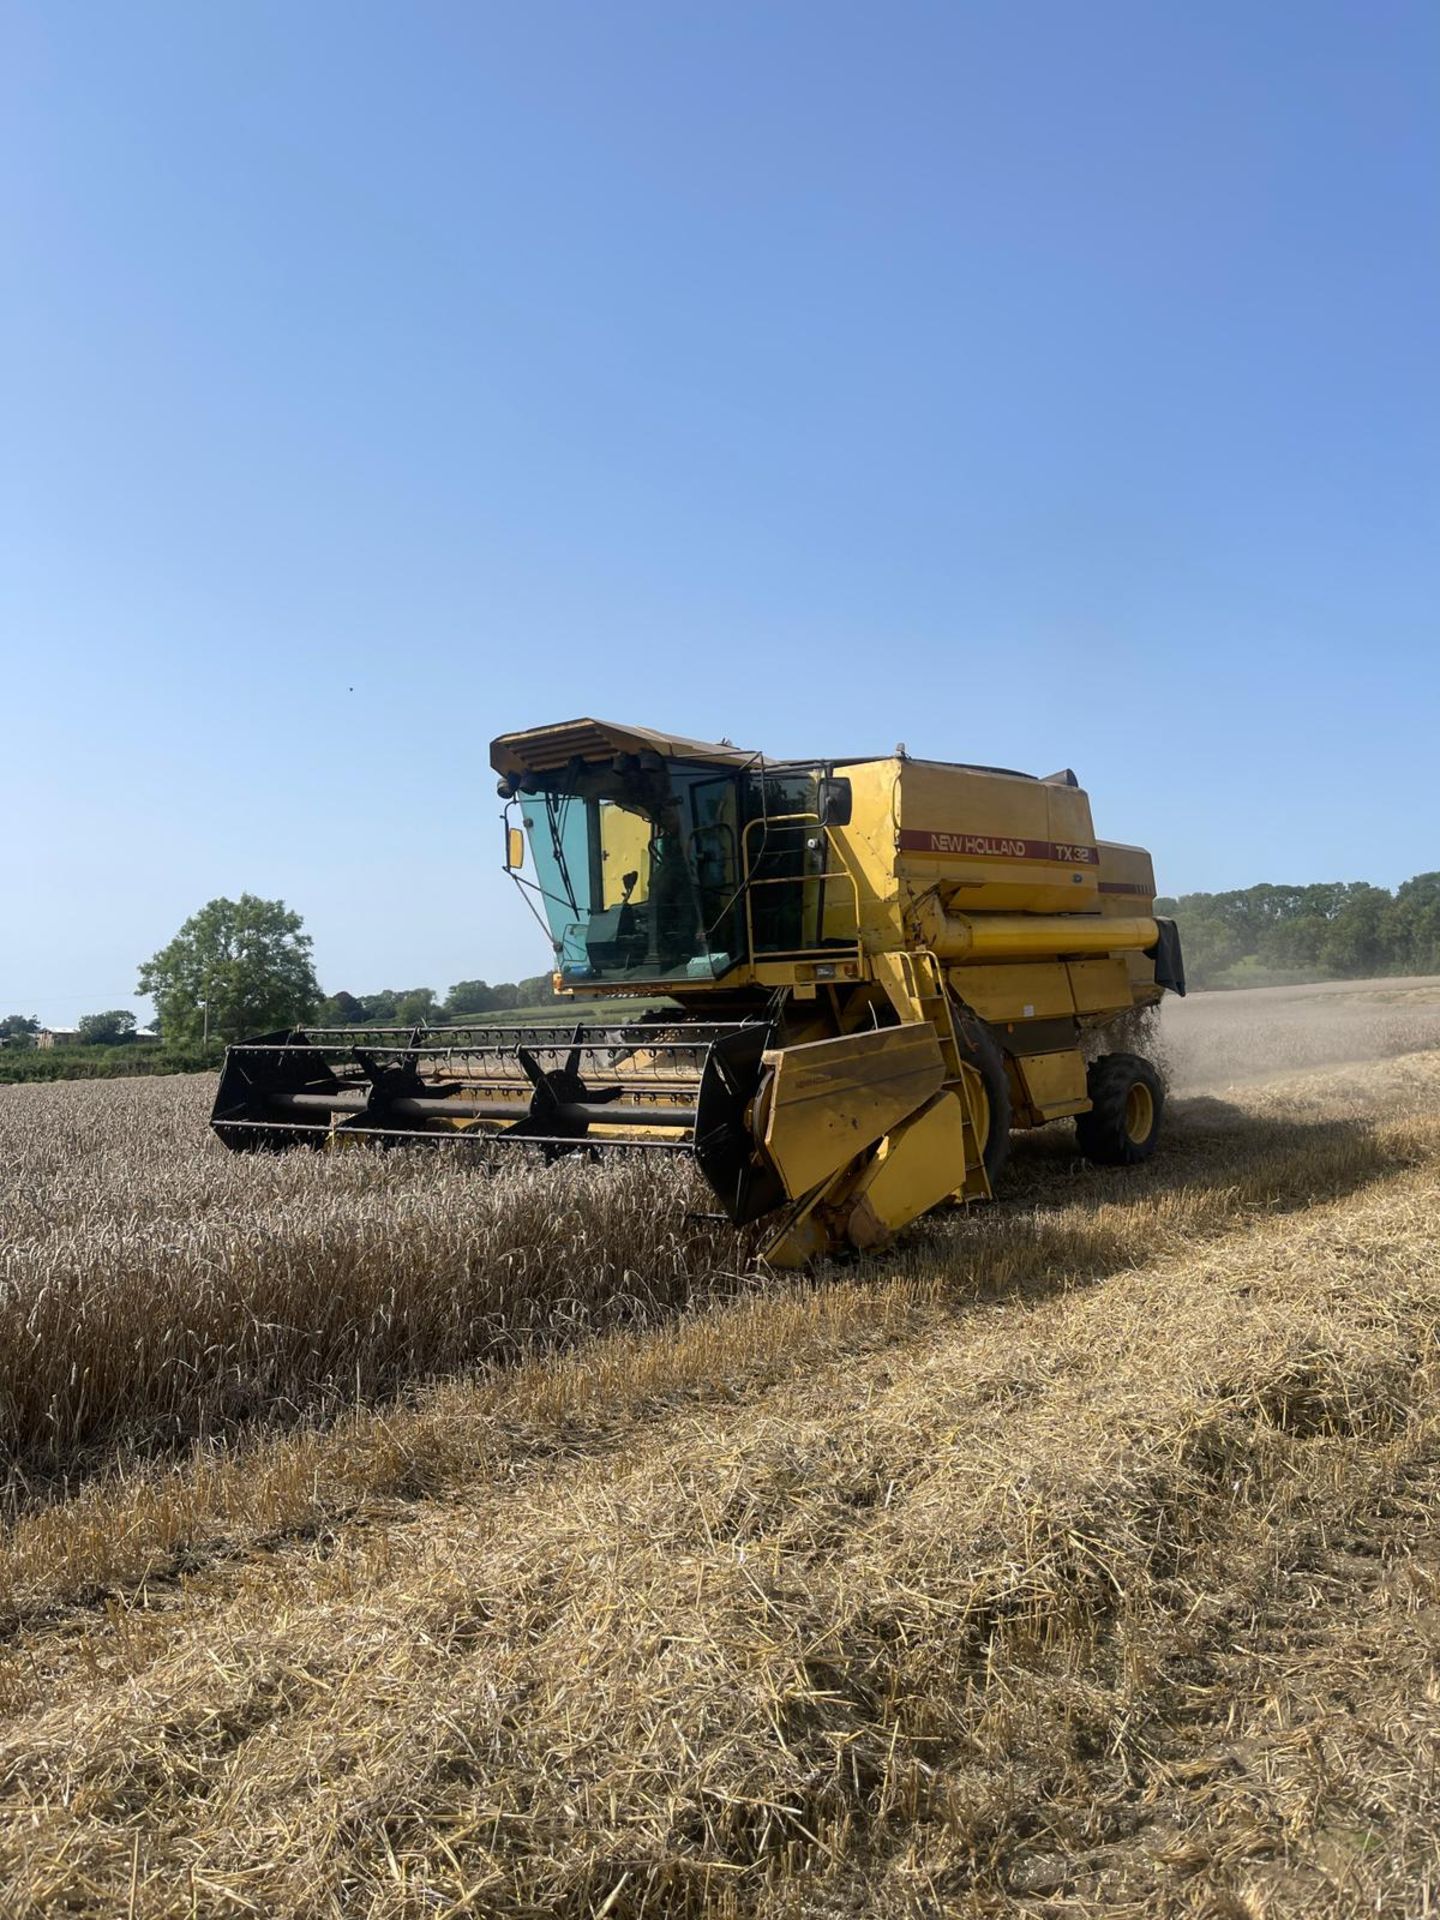 NEW HOLLAND TX32 COMBINE - Image 2 of 19